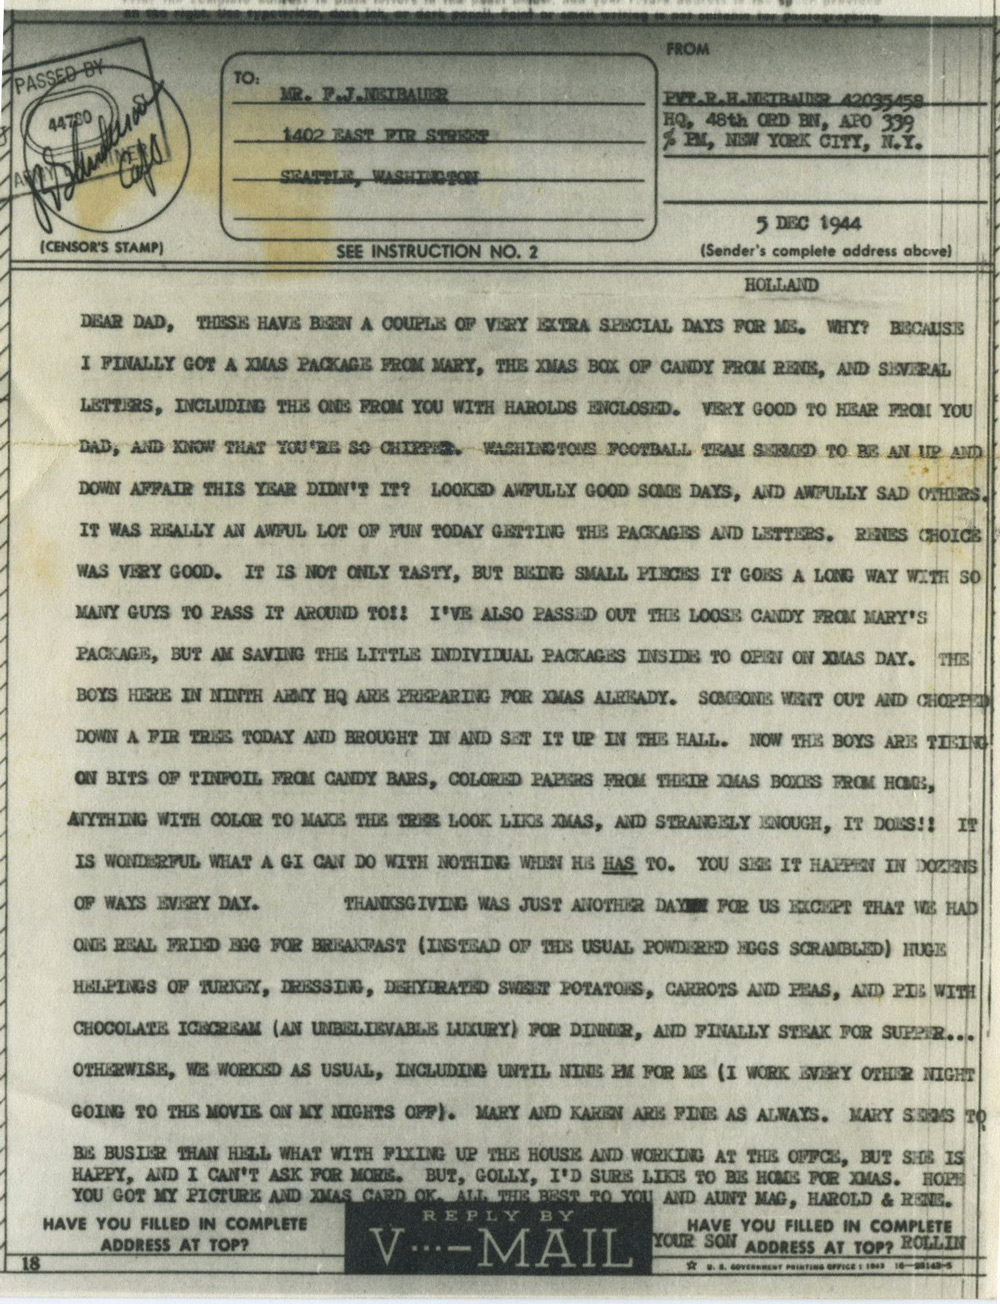 tofr12-5-44-ww2-letters-mary-anne-erickson